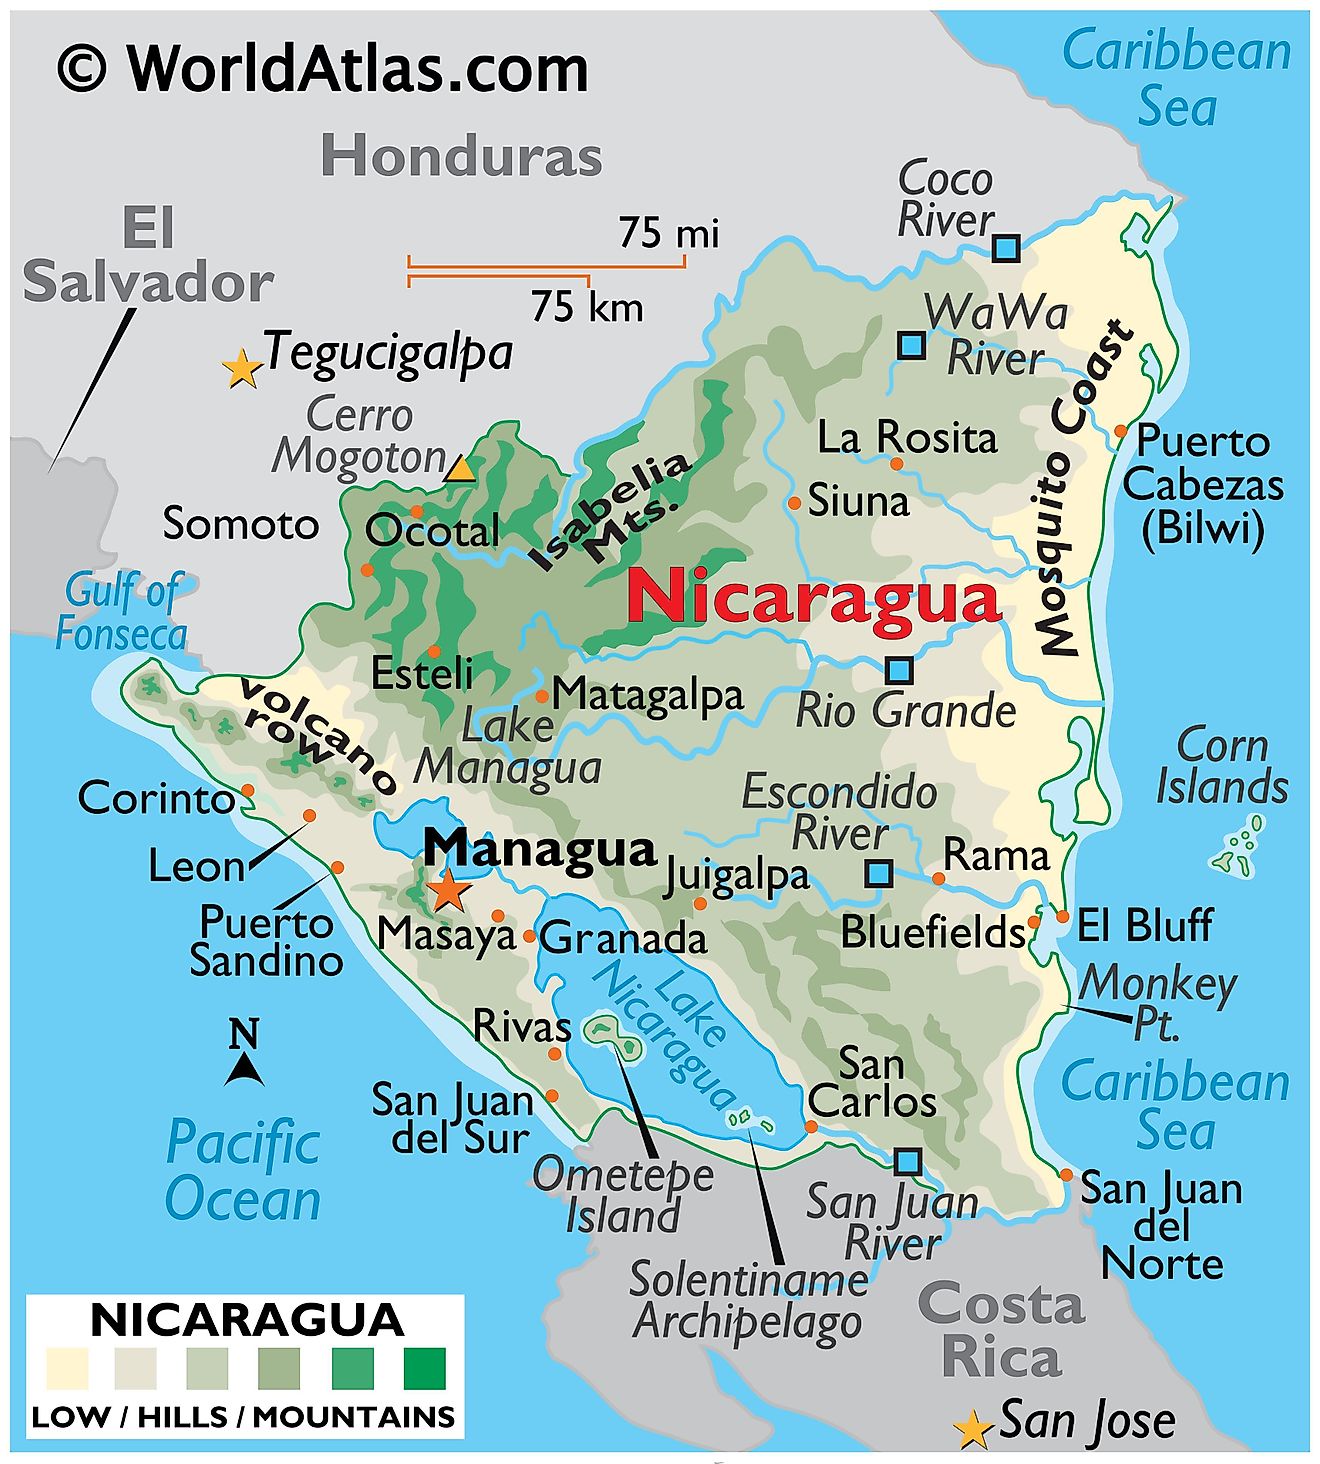 Physical Map of Nicaragua showing terrain, mountains, extreme points, Mosquito coast, volcanoes, rivers, lakes, major cities, international boundaries, etc.